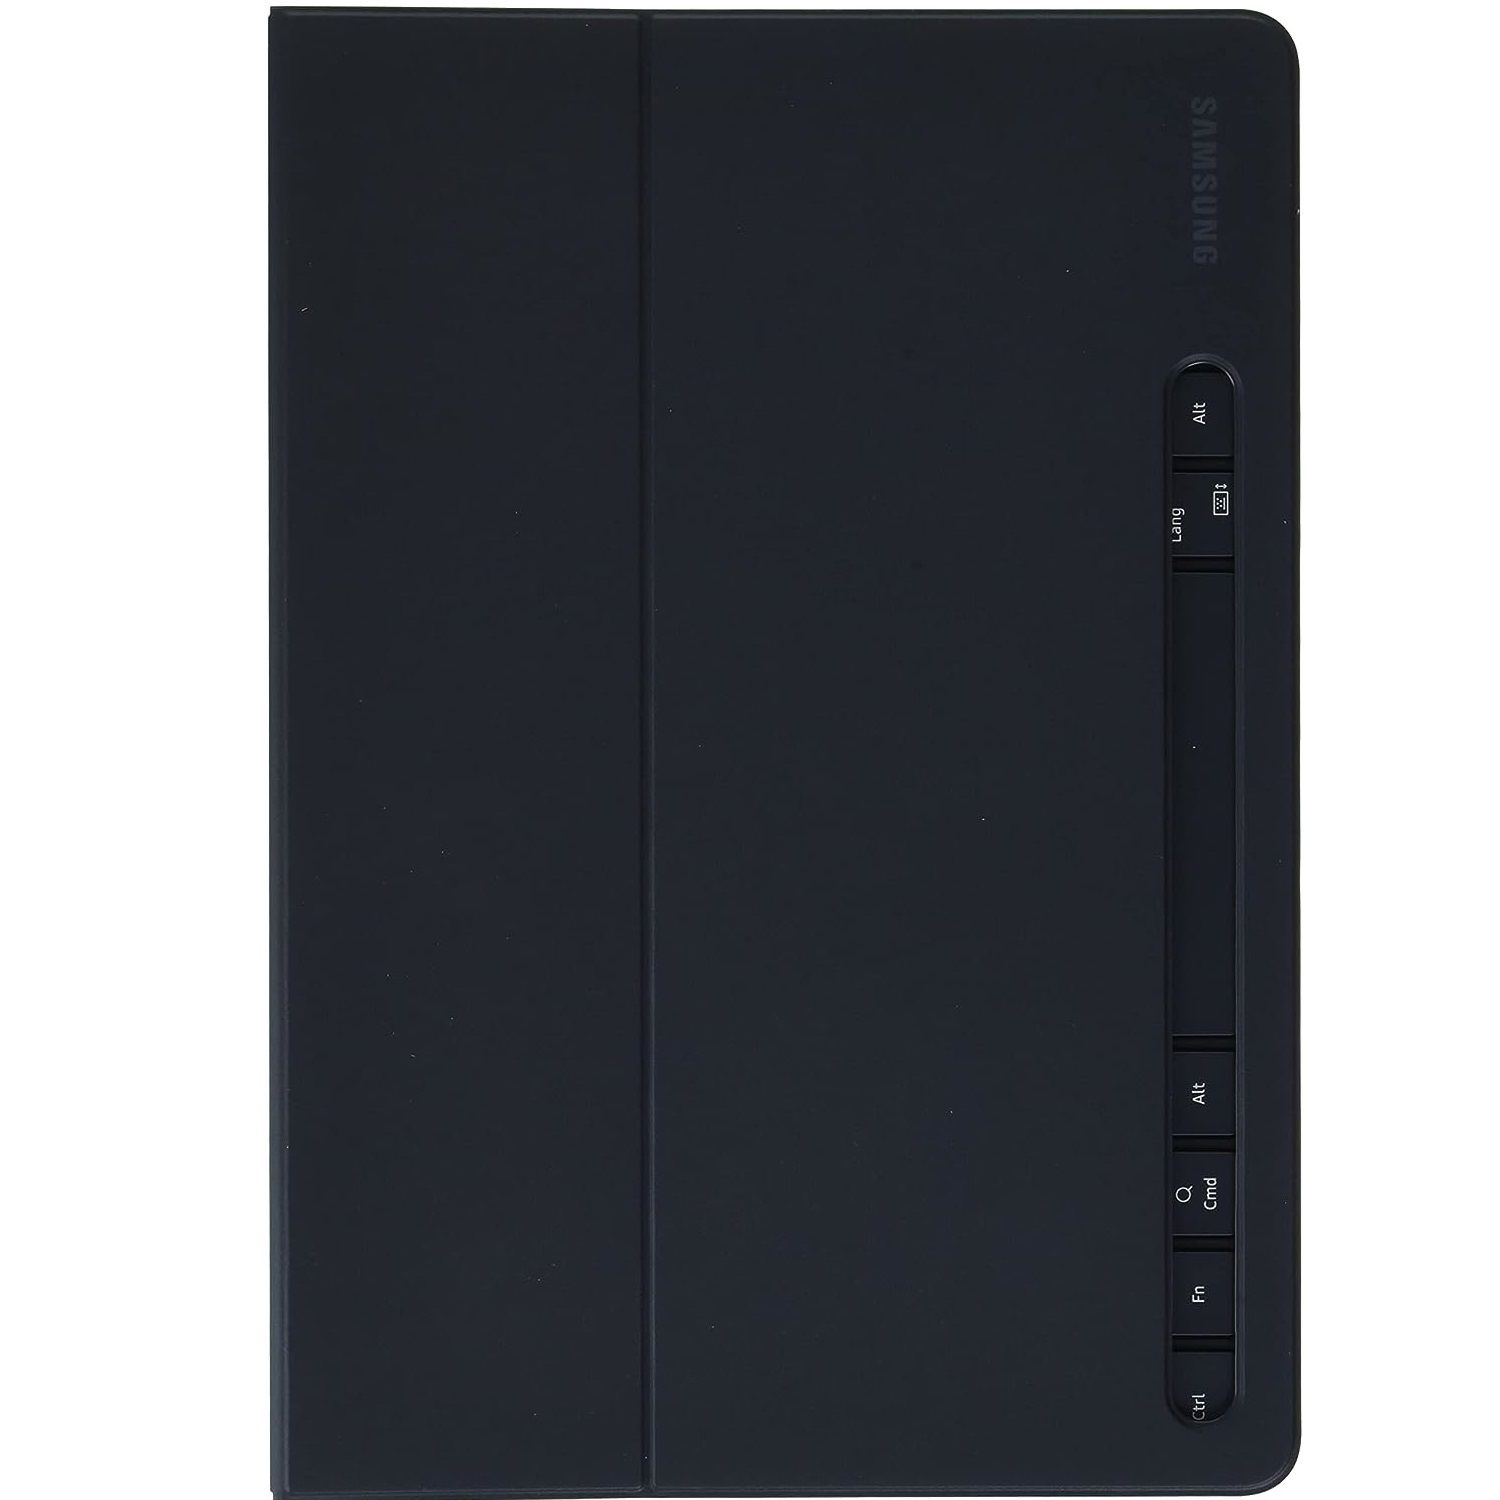 Samsung Book Cover for Galaxy Tab S8 shown on the tablet against a white background